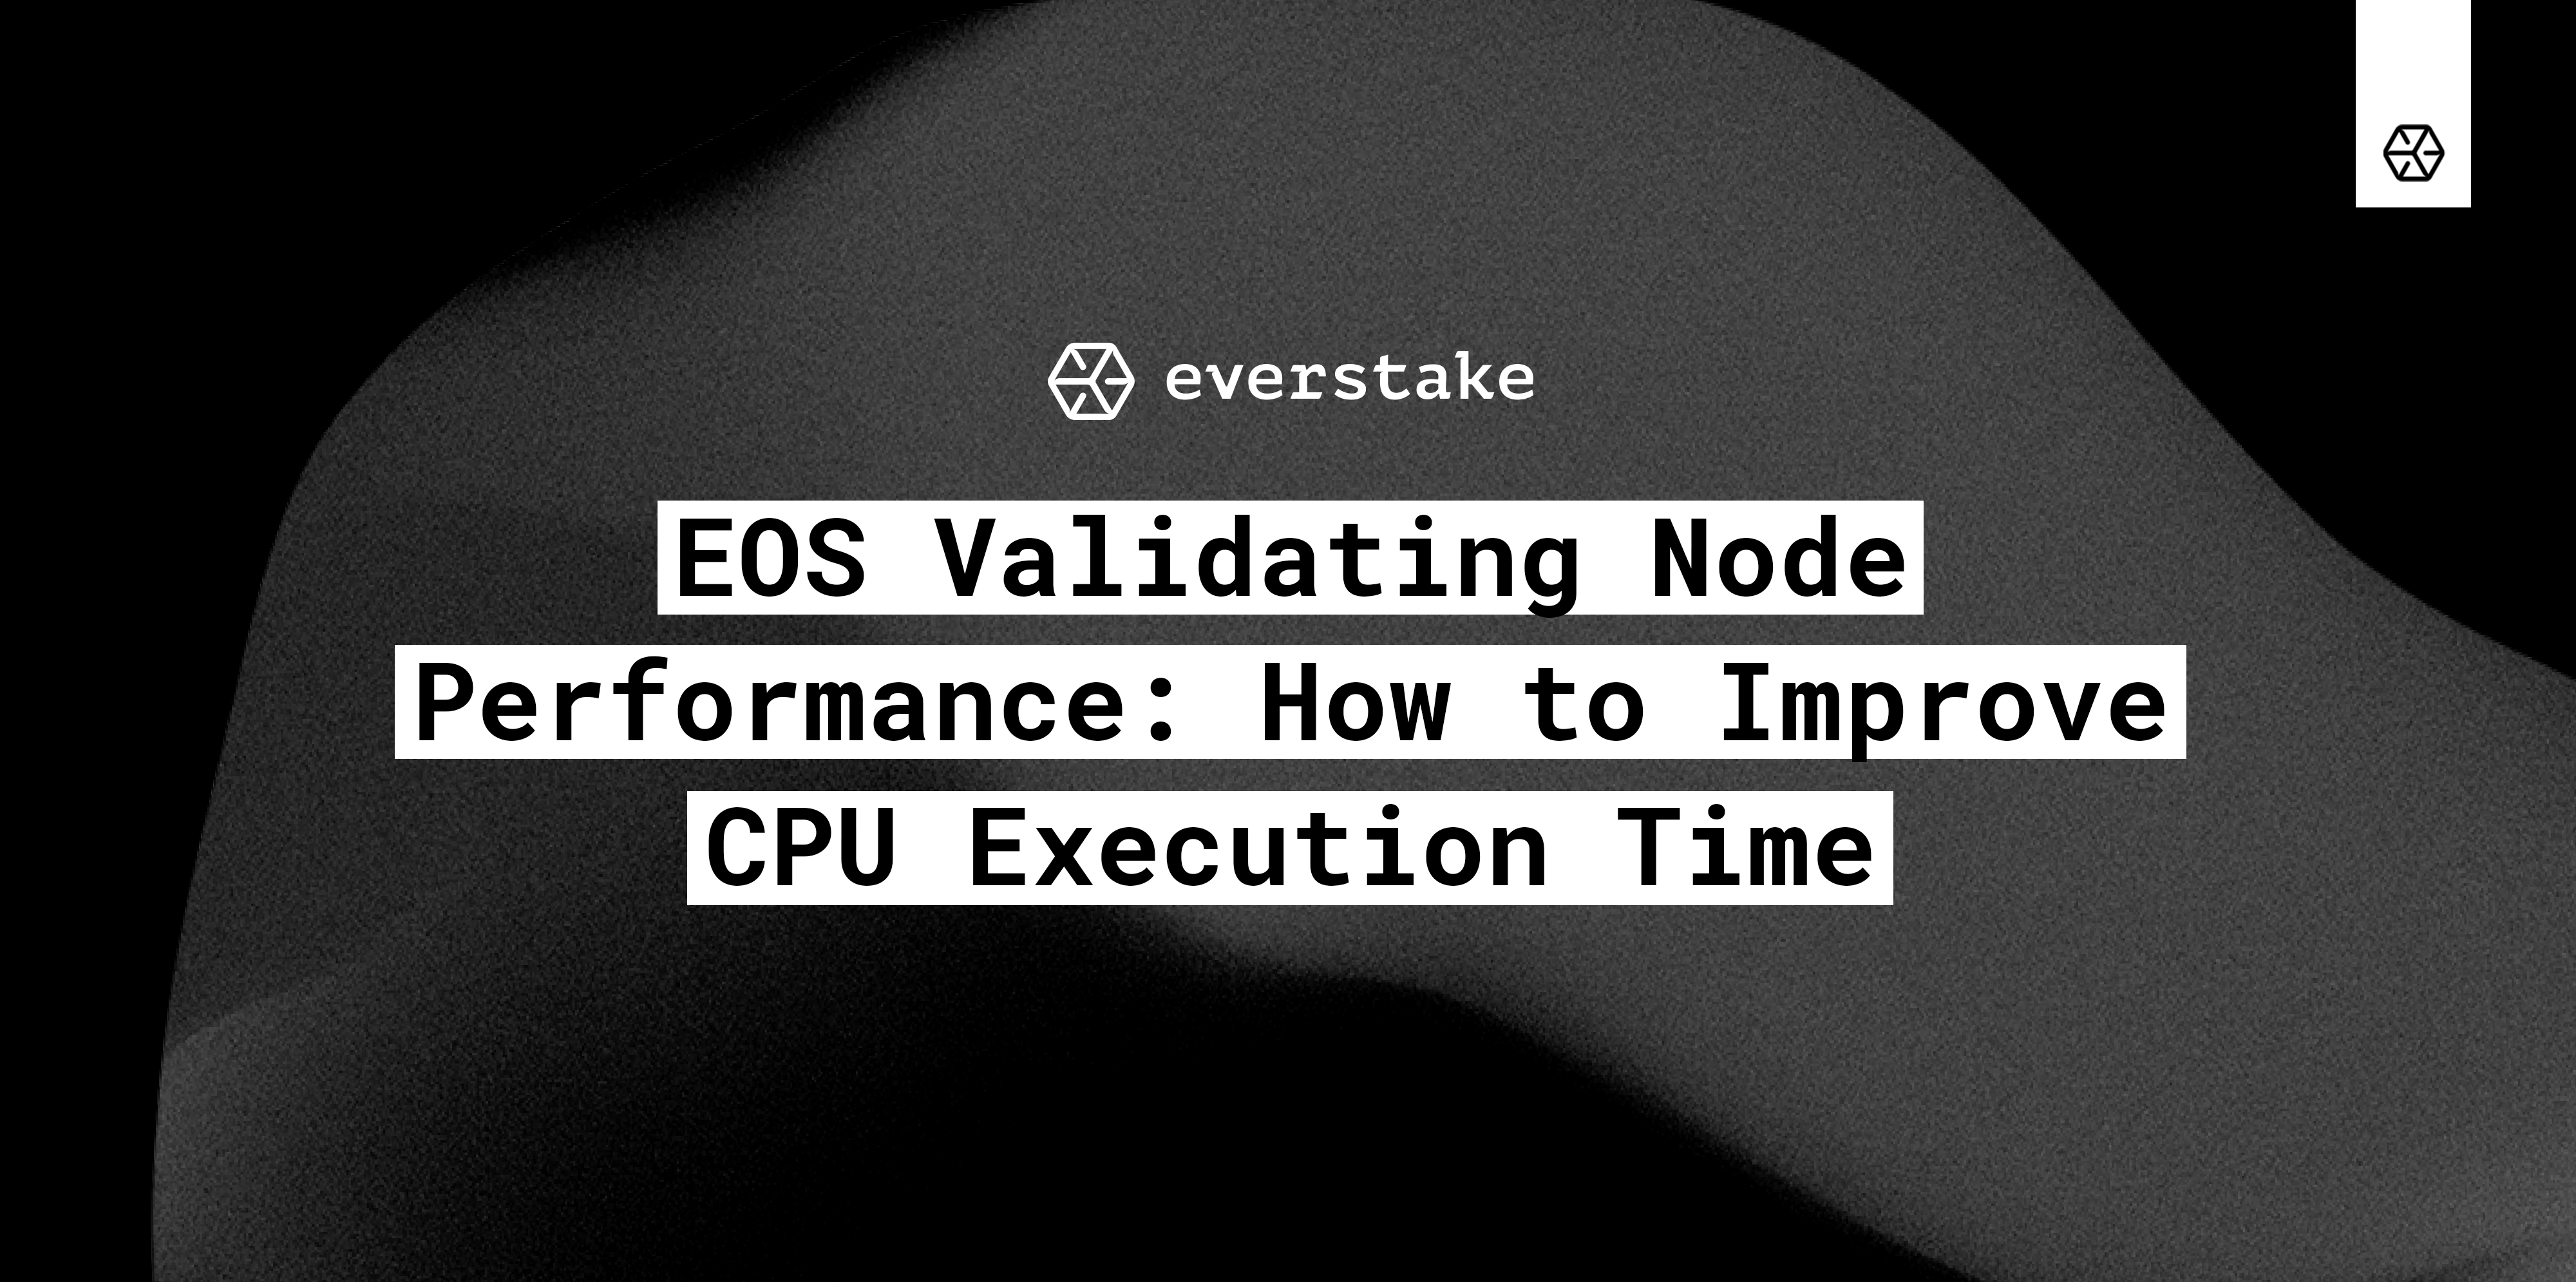 EOS Validating Node Performance: How to Improve CPU Execution Time